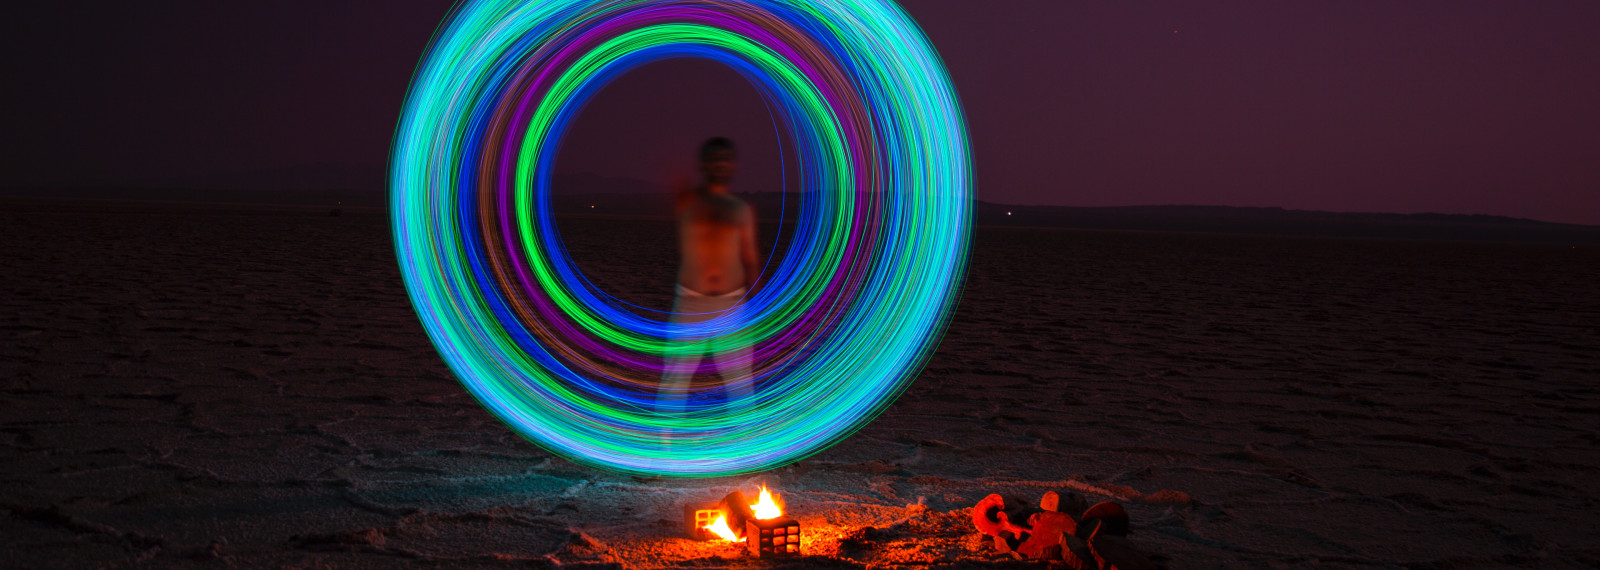 image of an illuminated circle above a camp fire and in front of a figure